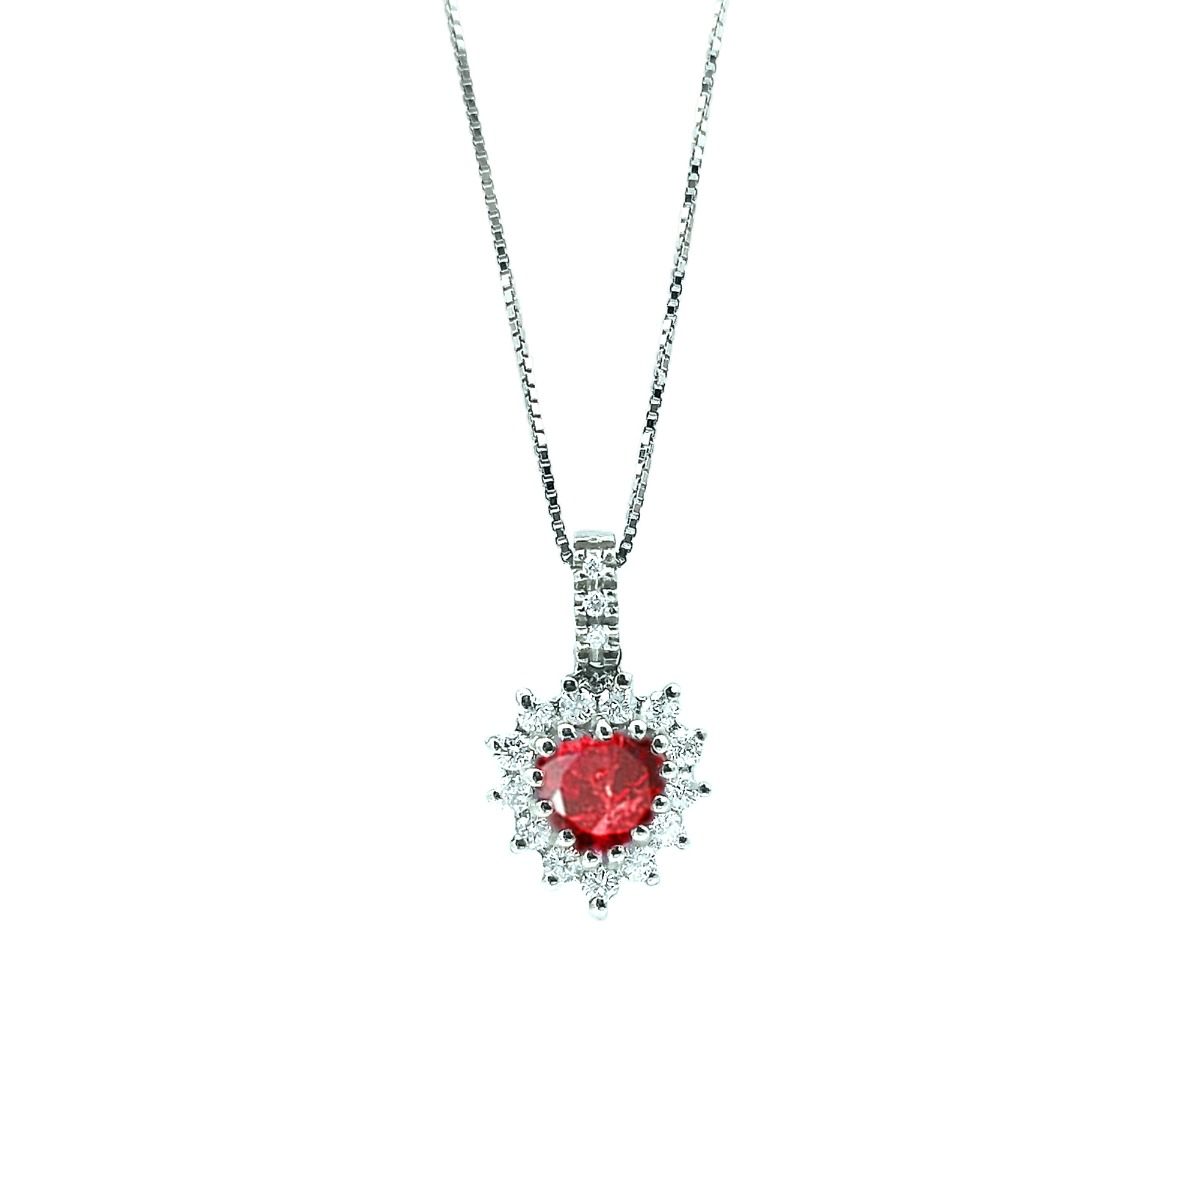 Elegant Necklace In White Gold And Diamonds With A Heart-Shaped Ruby